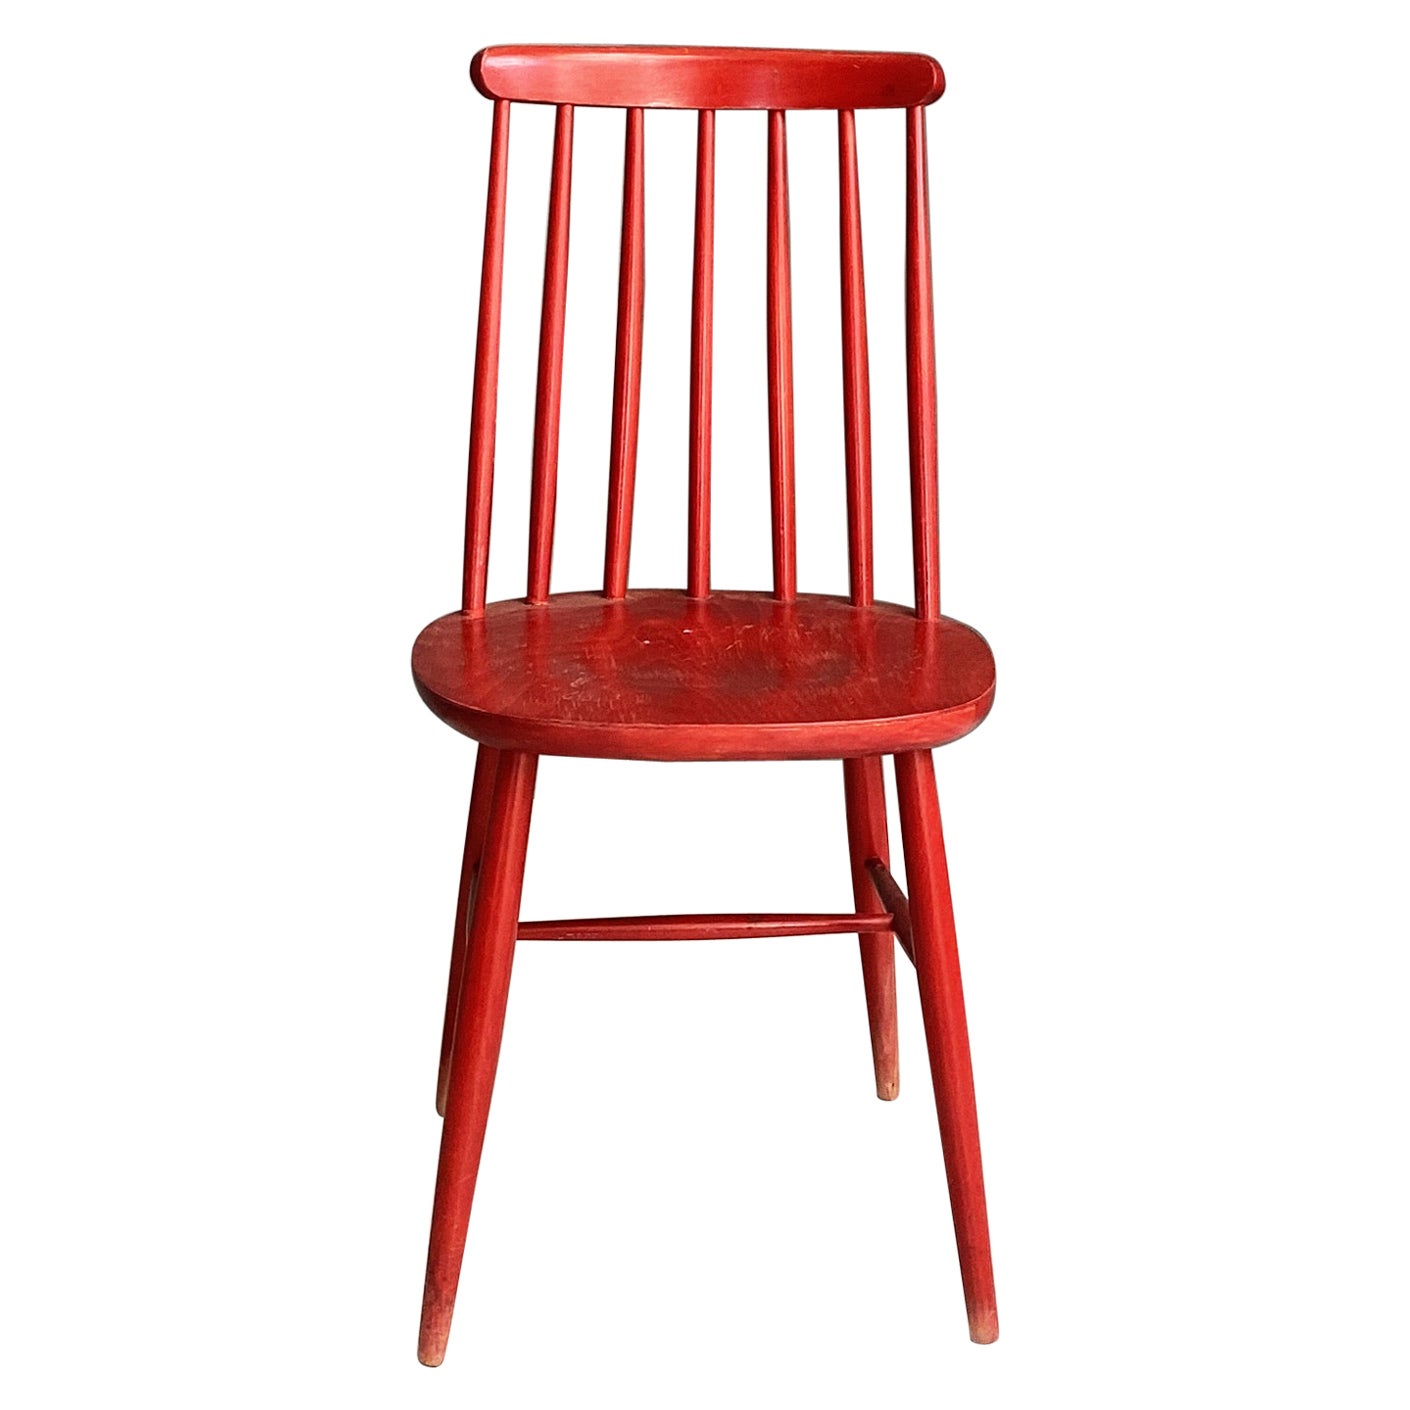 Mid-Century Modern Northern Europe Red Wooden Chair, 1960s For Sale